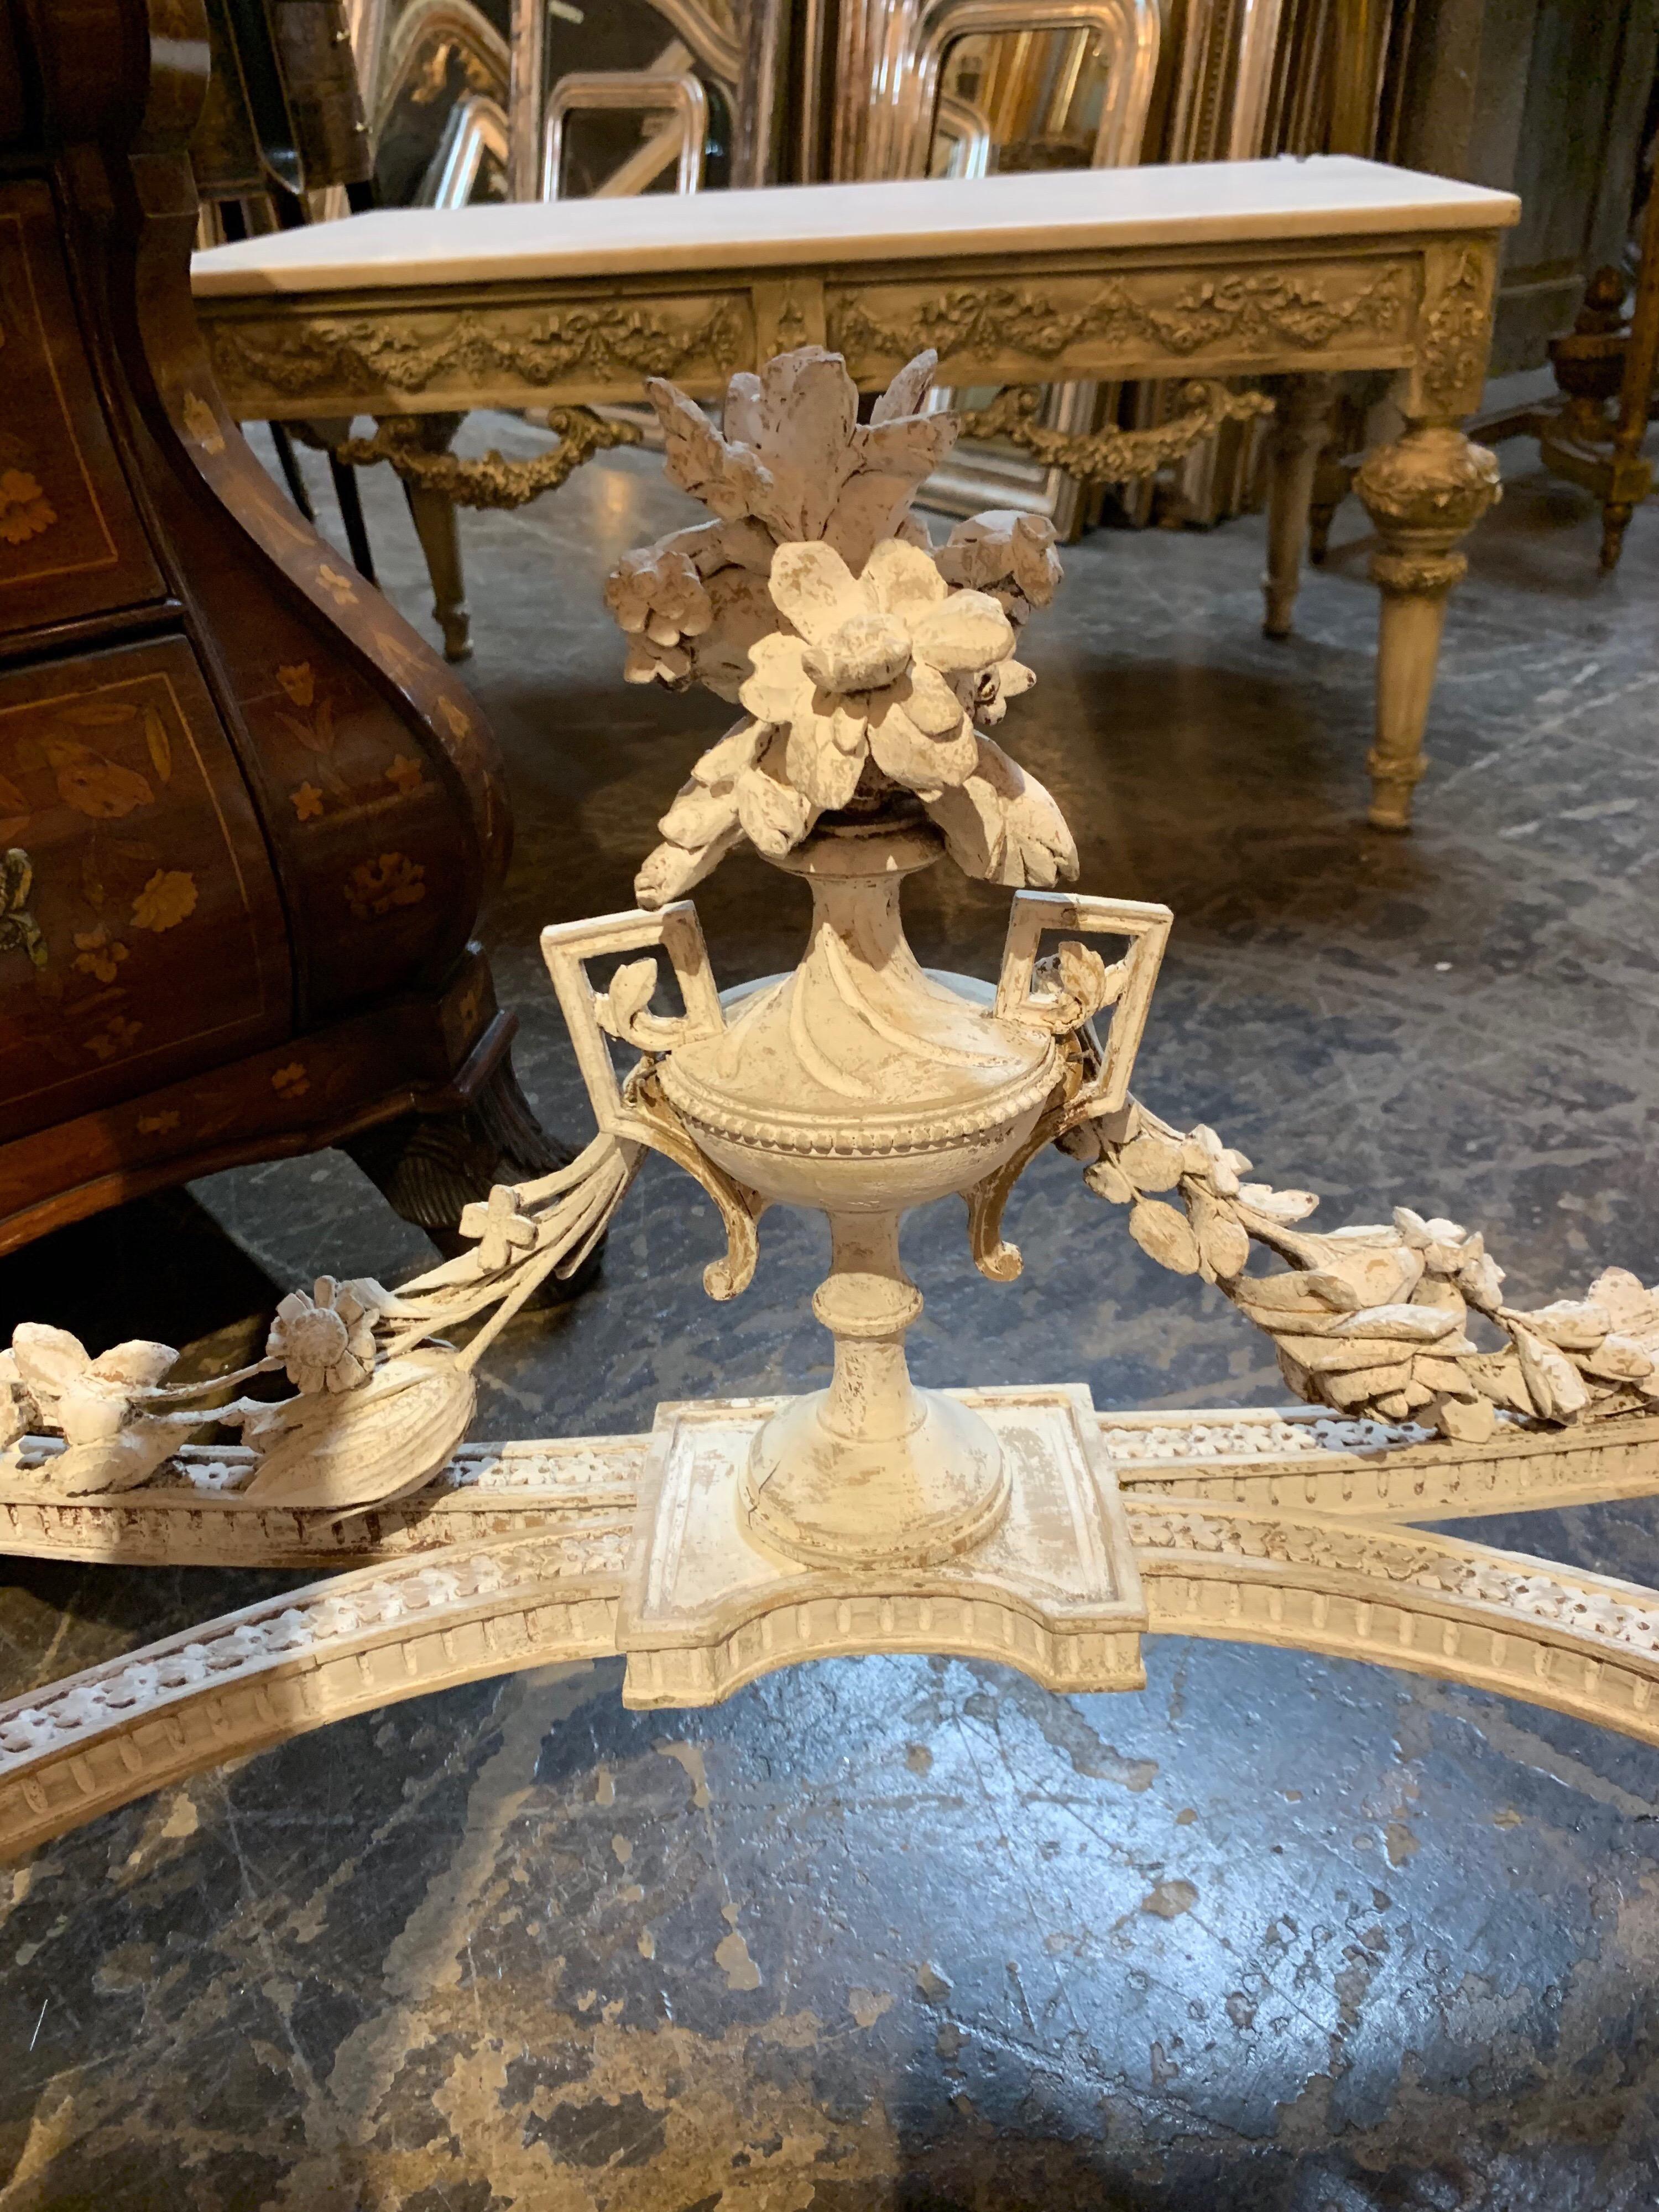 Gorgeous 19th century French Louis XVI style carved and painted demilune table.
Exquisite carvings and beautiful marble top as well. A very impressive piece.